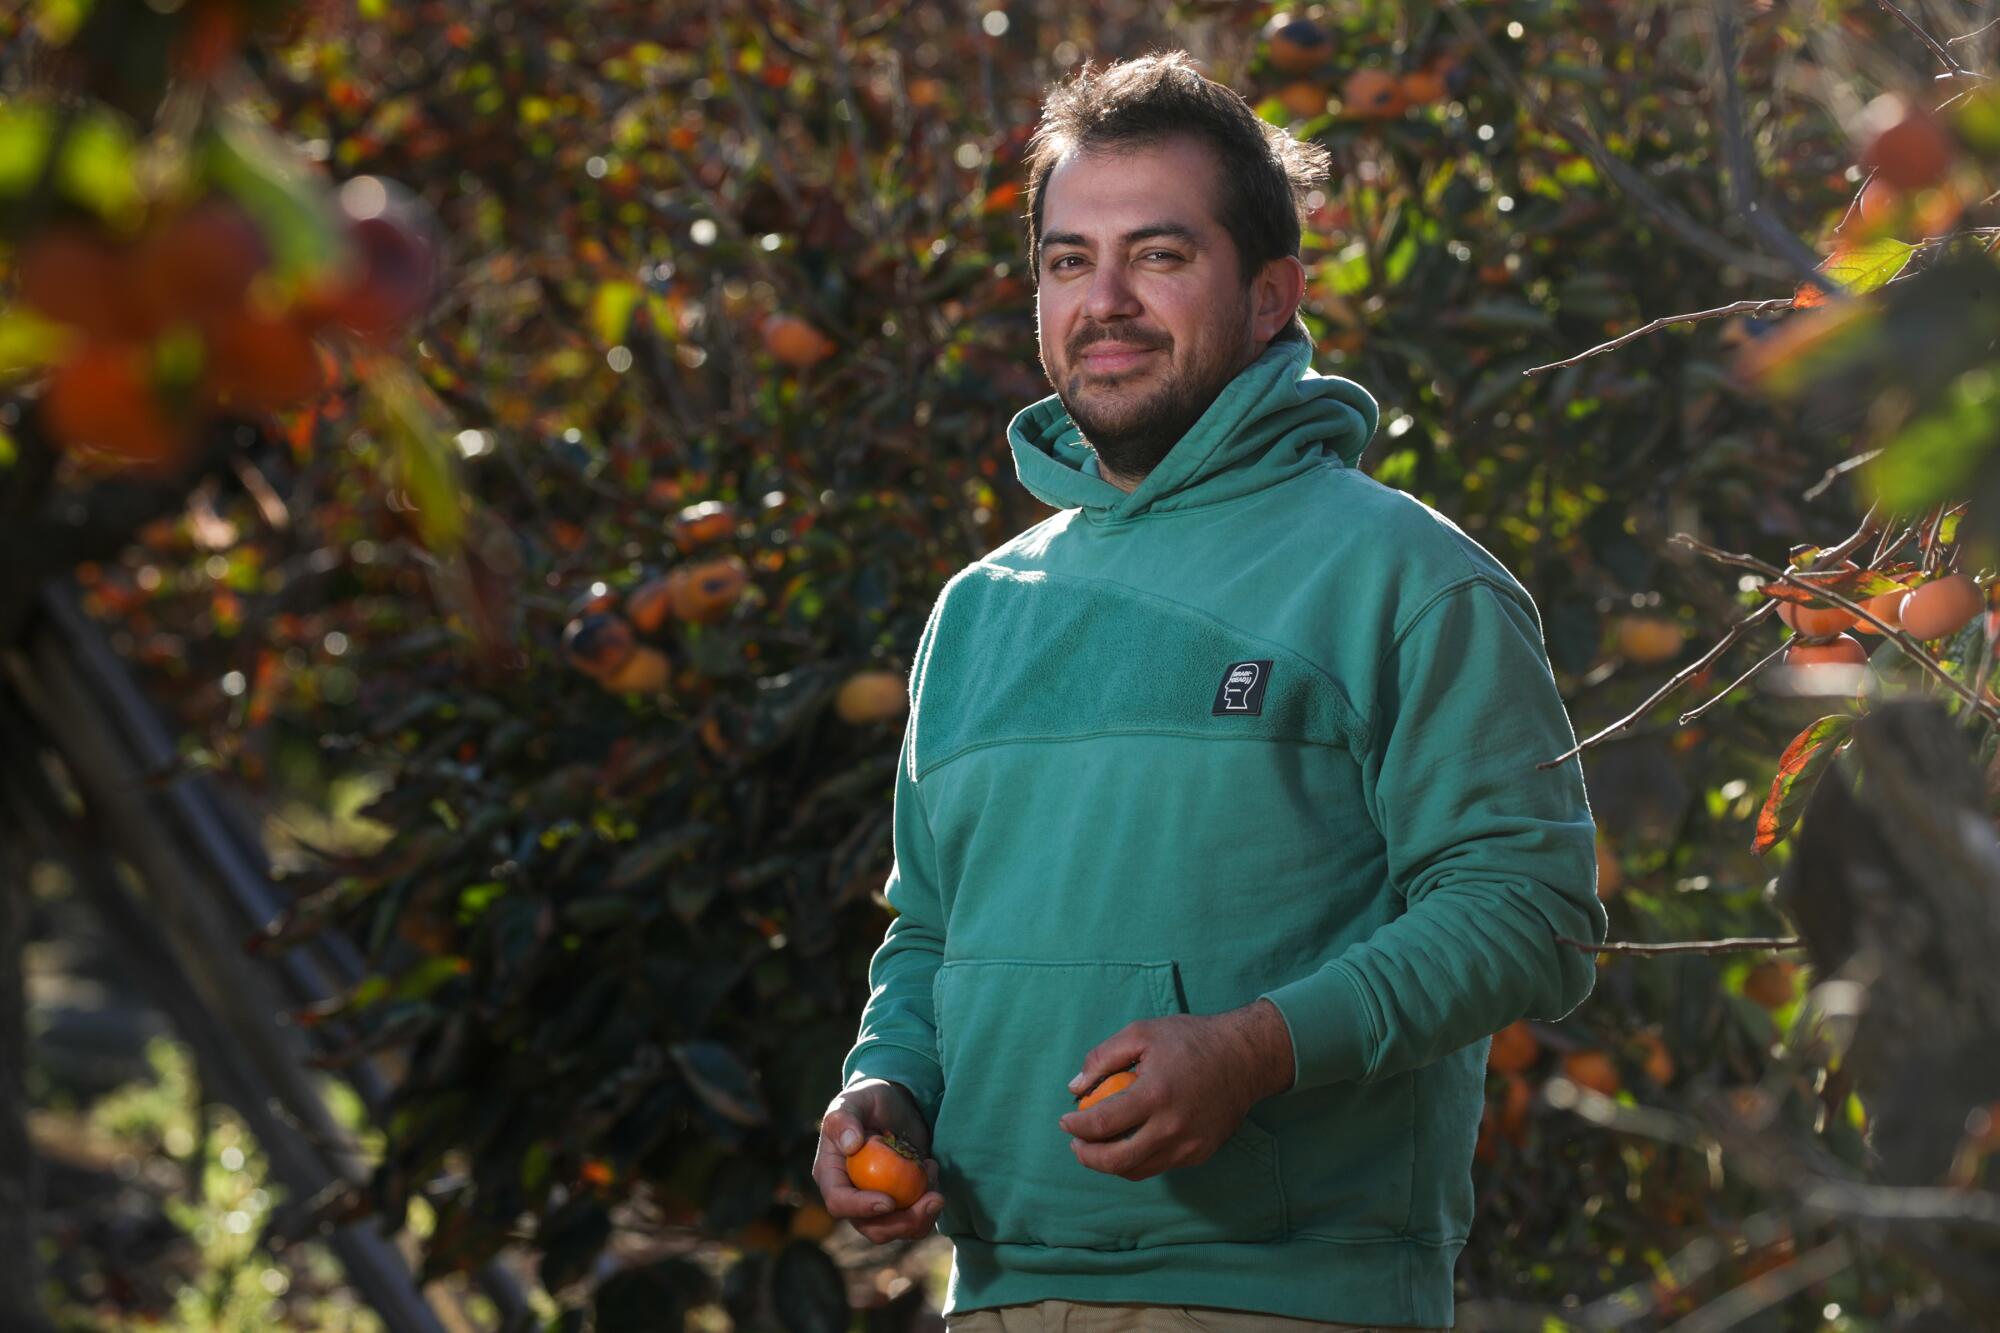 A man stands in an orchard, holding orange fruit in both hands